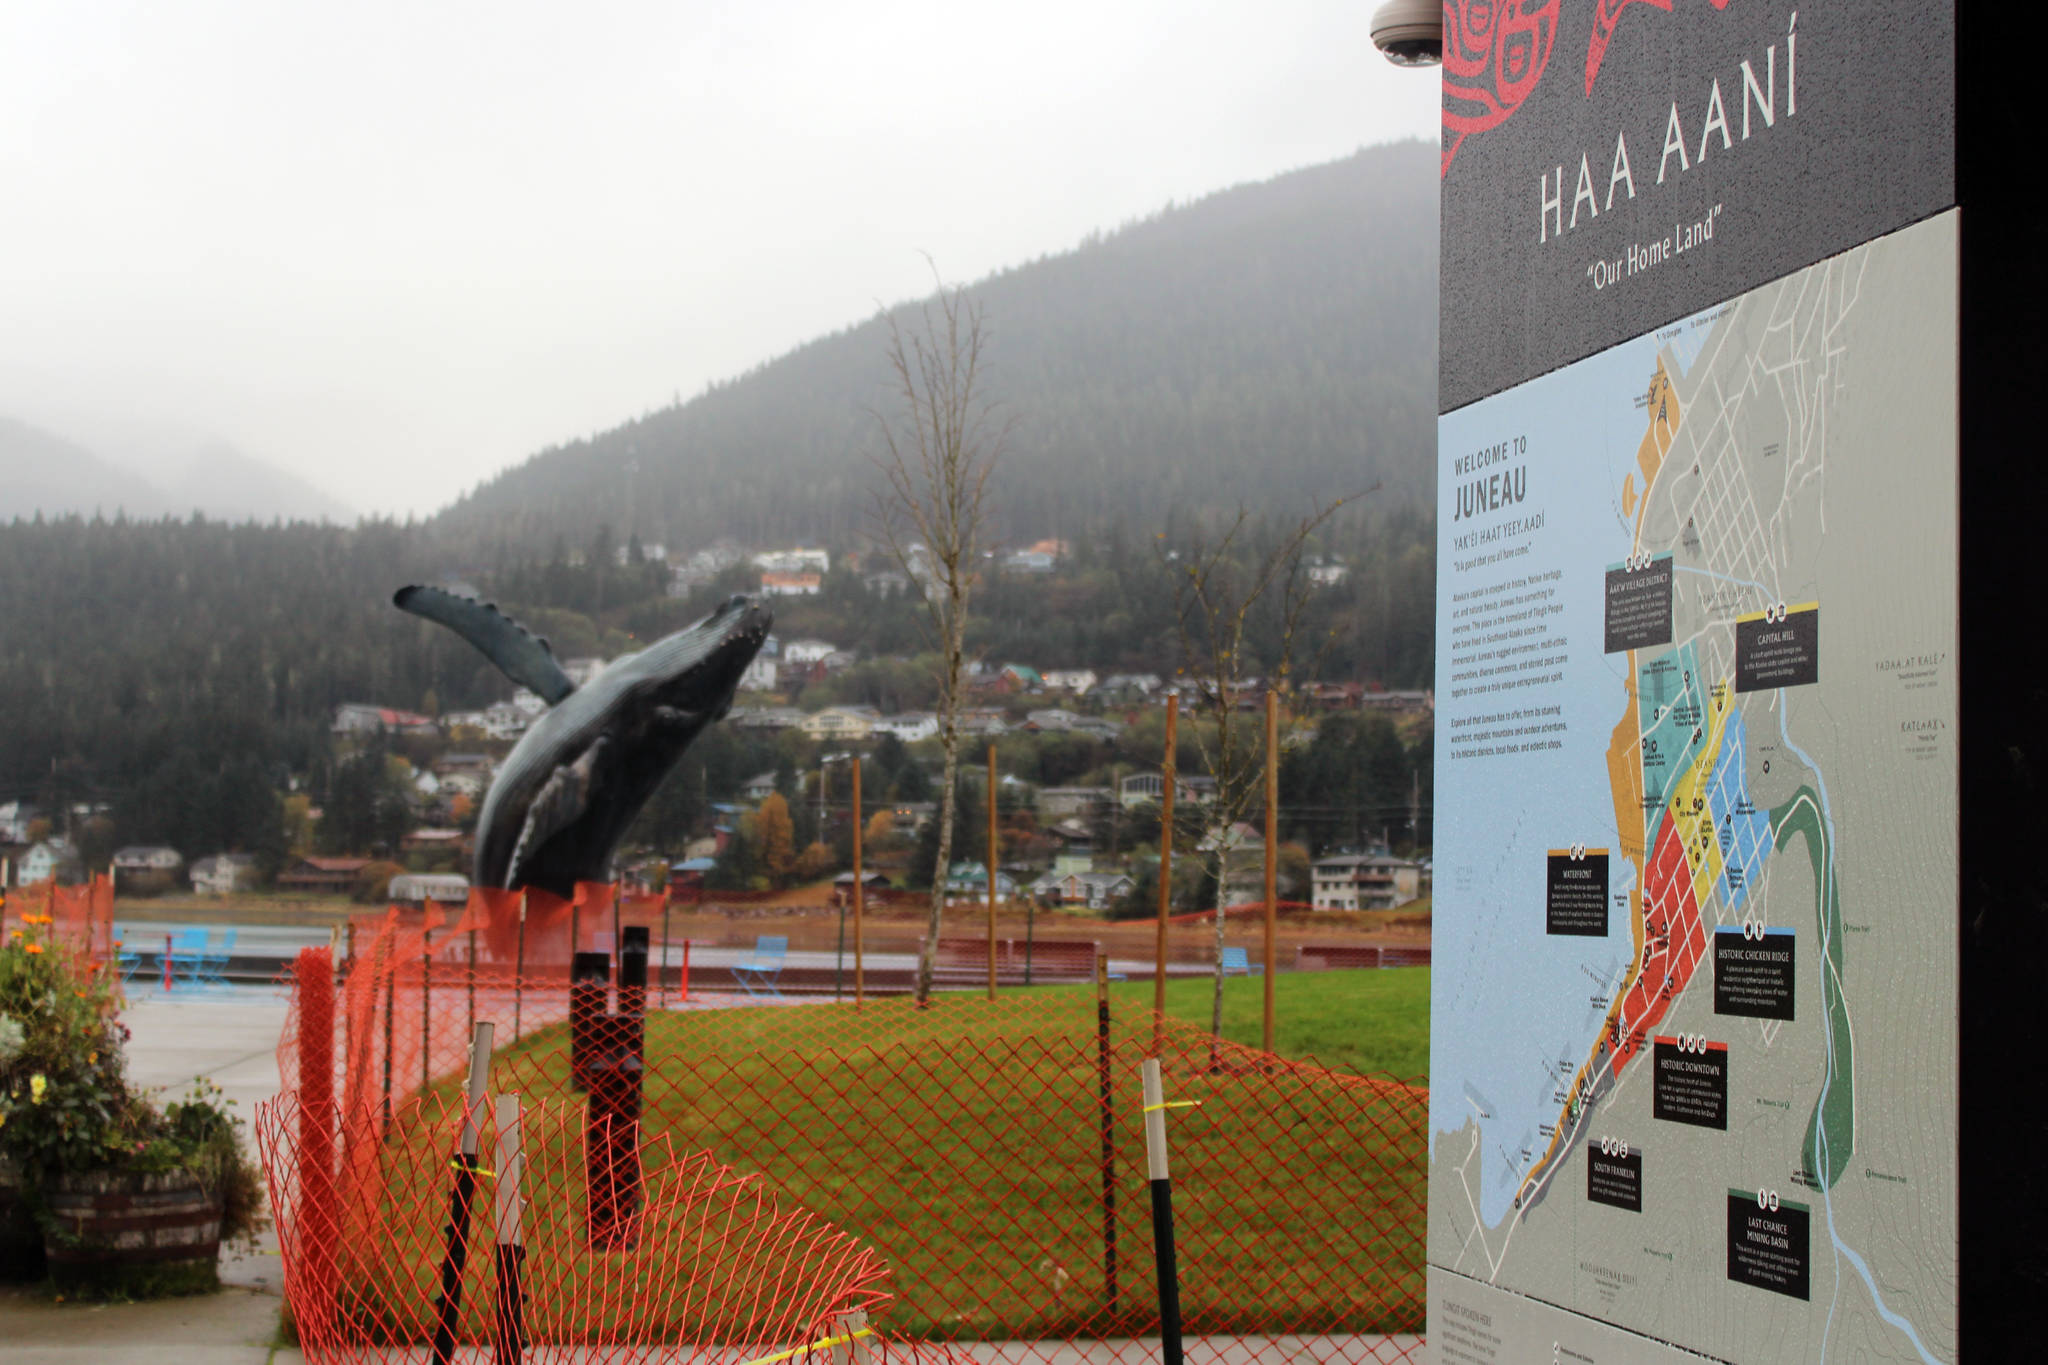 Downtown Juneau will soon have improved signage and maps like this one seen at Mayor Bill Overstreet Park on Oct. 10, 2020. (Ben Hohenstatt / Juneau Empire)